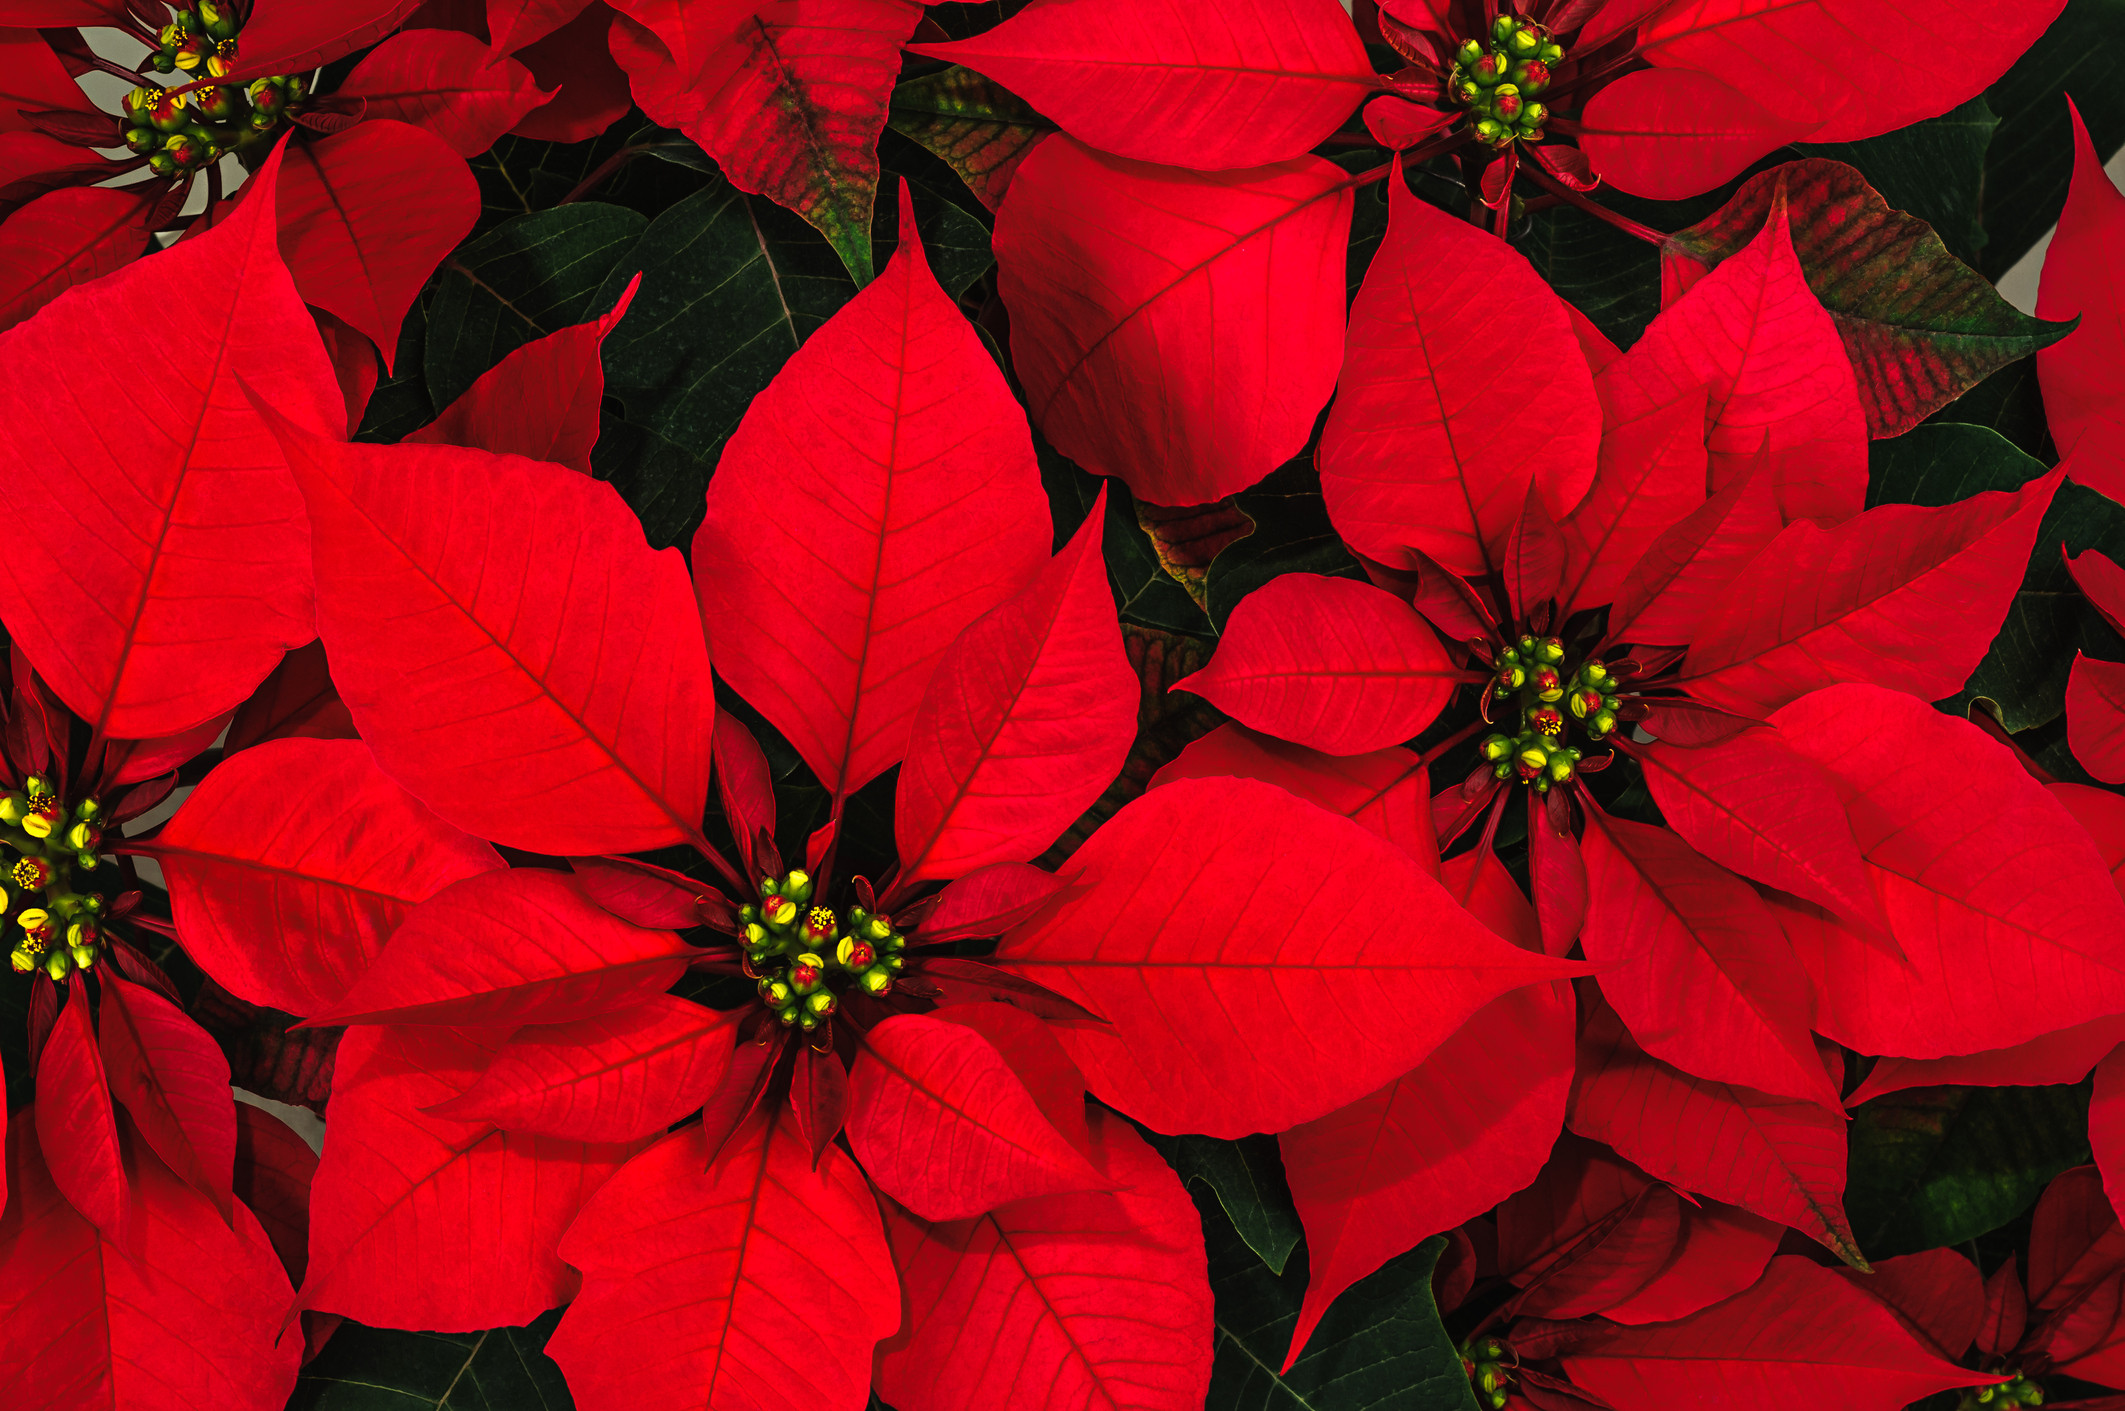 Christmas Flower Images
 The Origins of the Poinsettia A Long Strange Tale